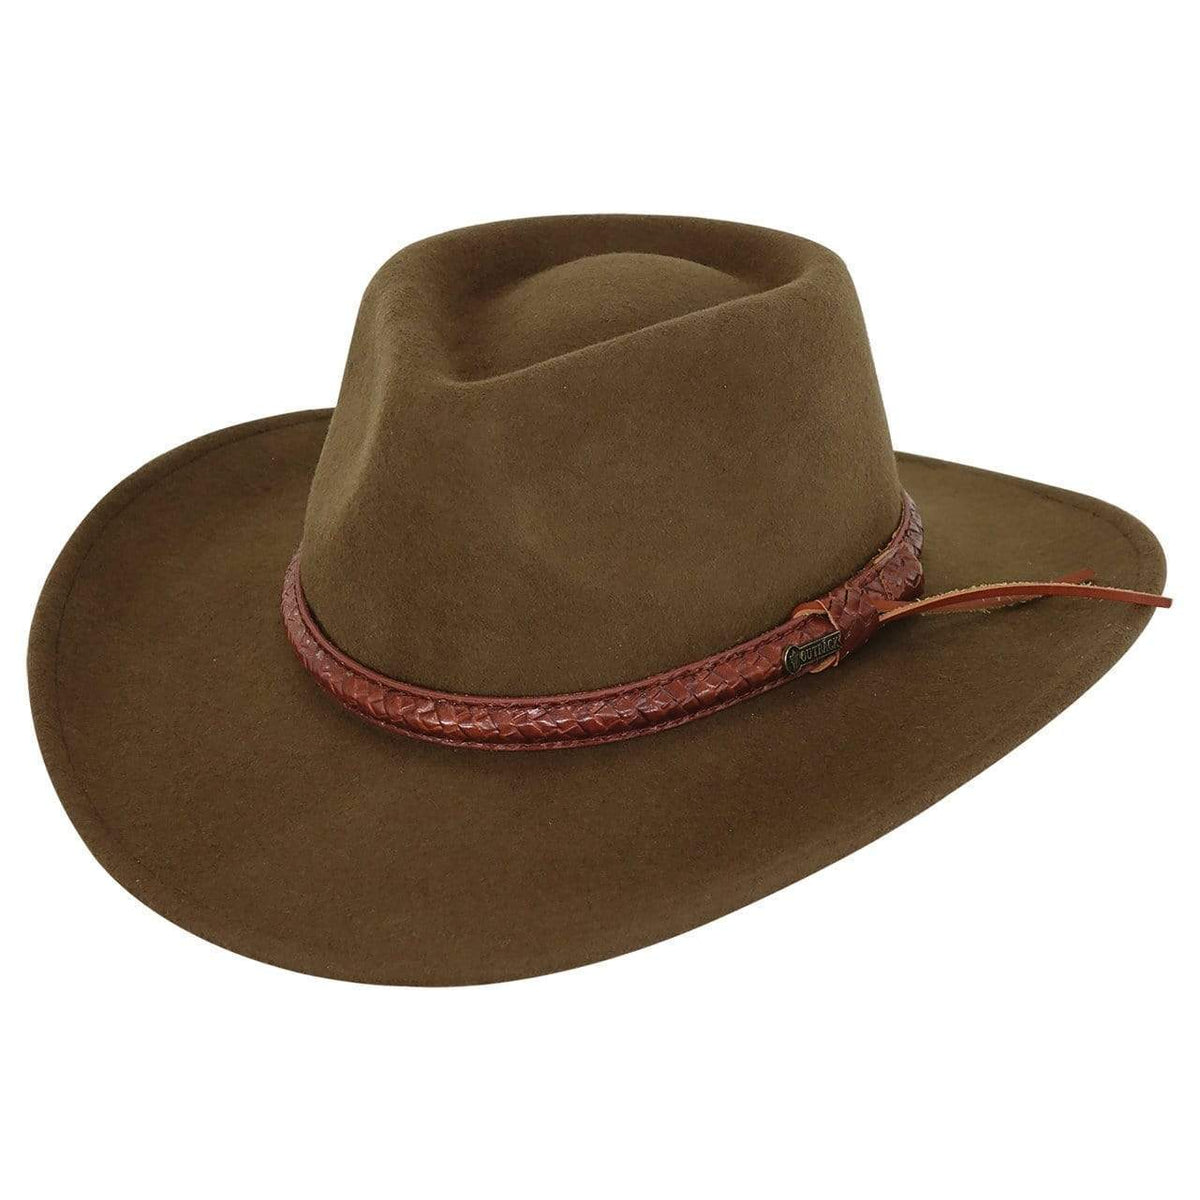 Dusty Rider  Wool Felt Hats by Outback Trading Company –